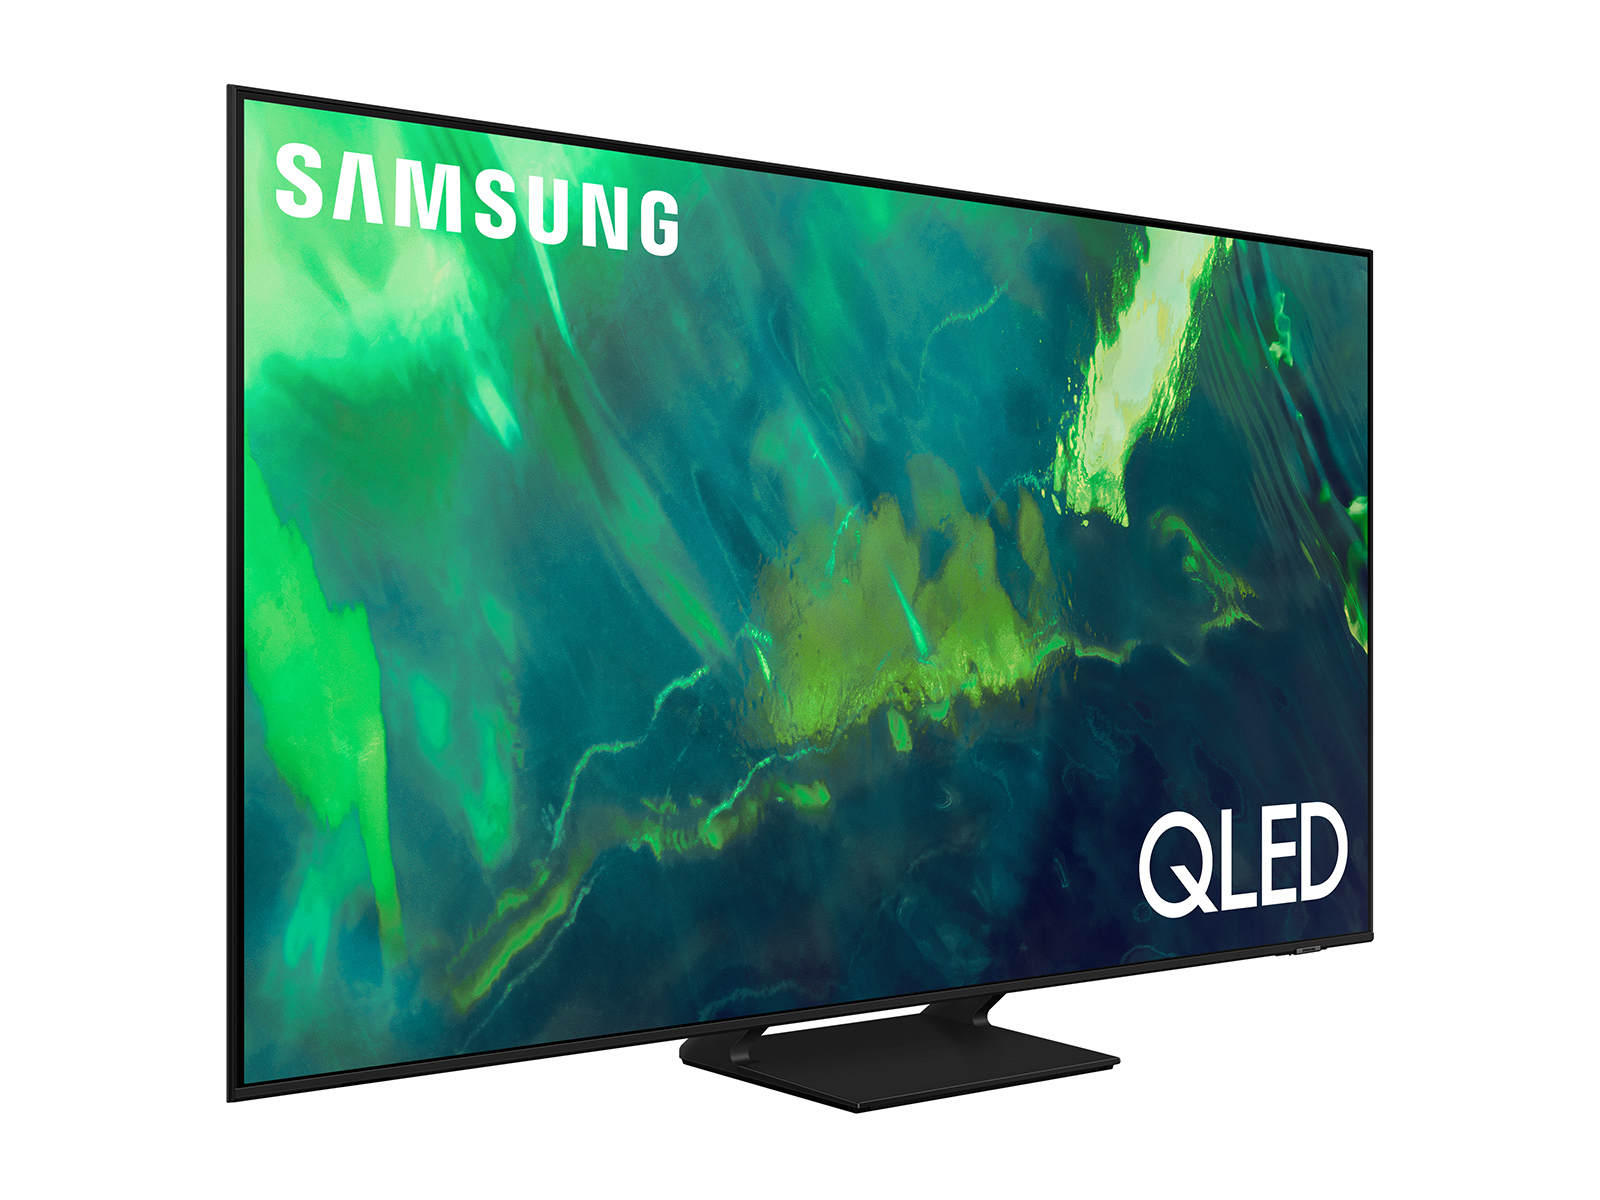 Buy 65 Inch QLED 4K Smart Television Q60A